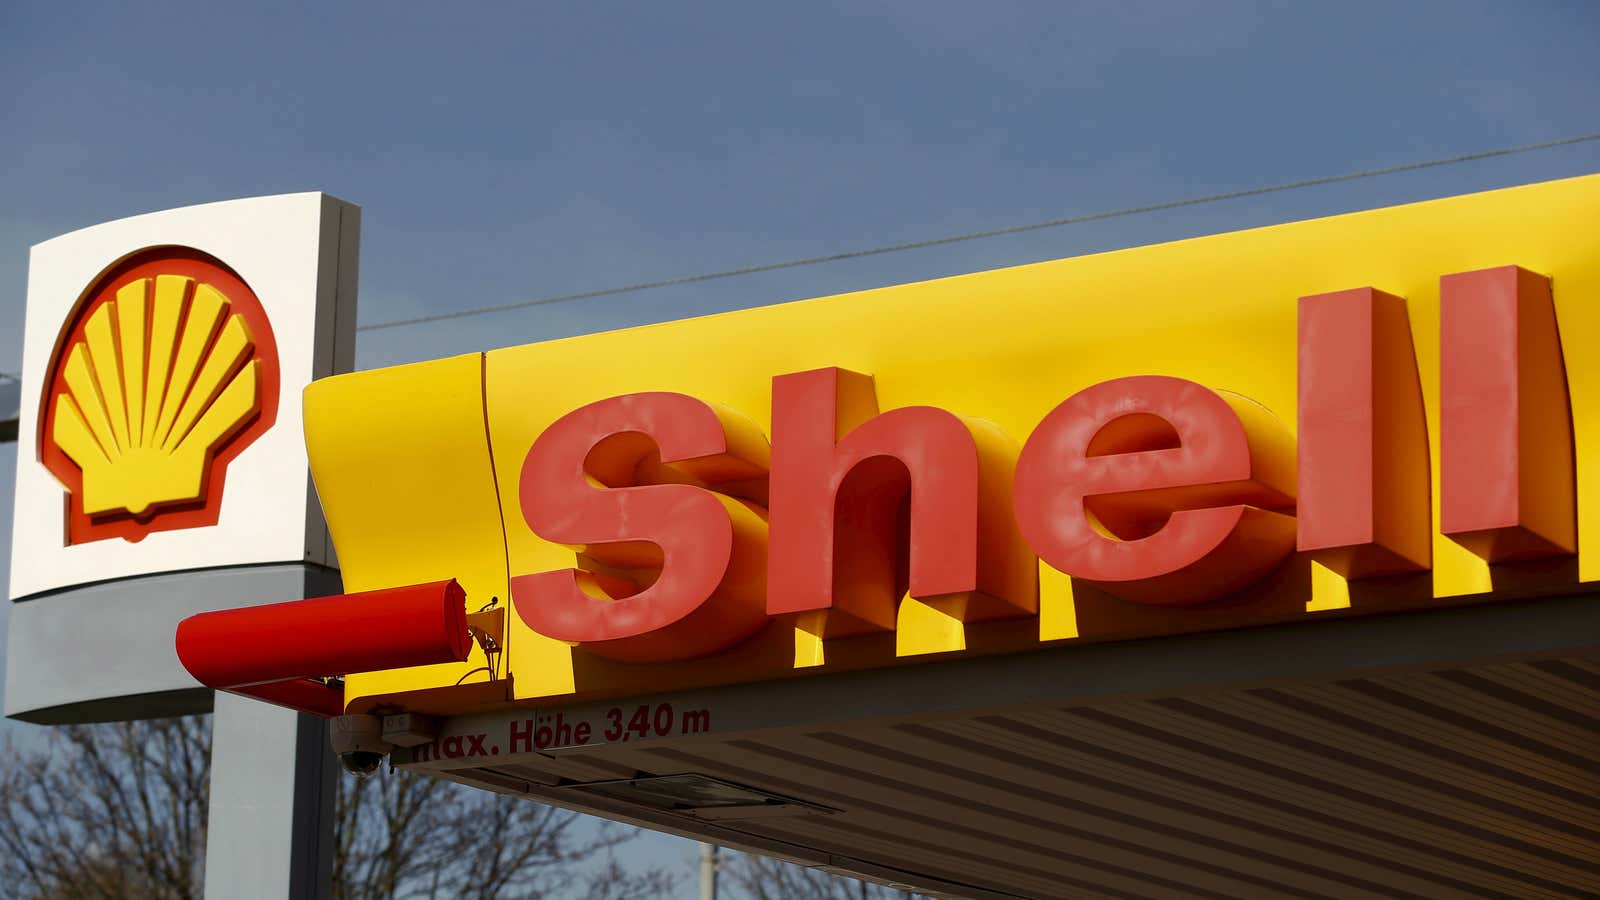 Shell is one of several European companies affected by the breakup that employs thousands of Americans.